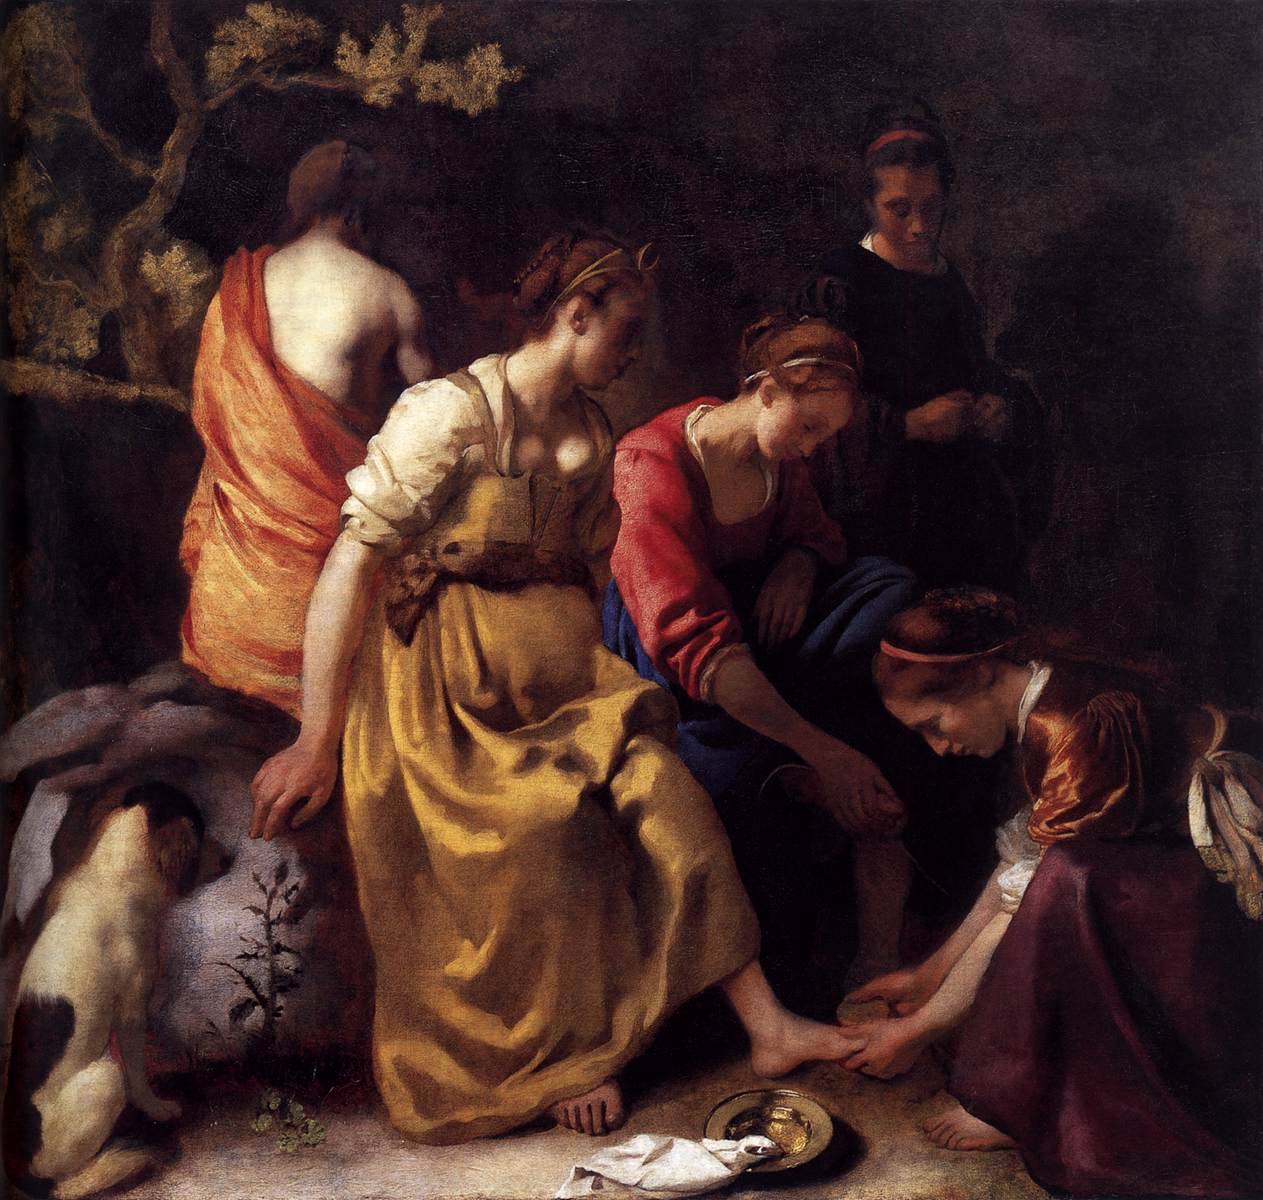 thisblueboy: Johannes Vermeer, Diana and her Companions, 1655 - 1656, Gallery of